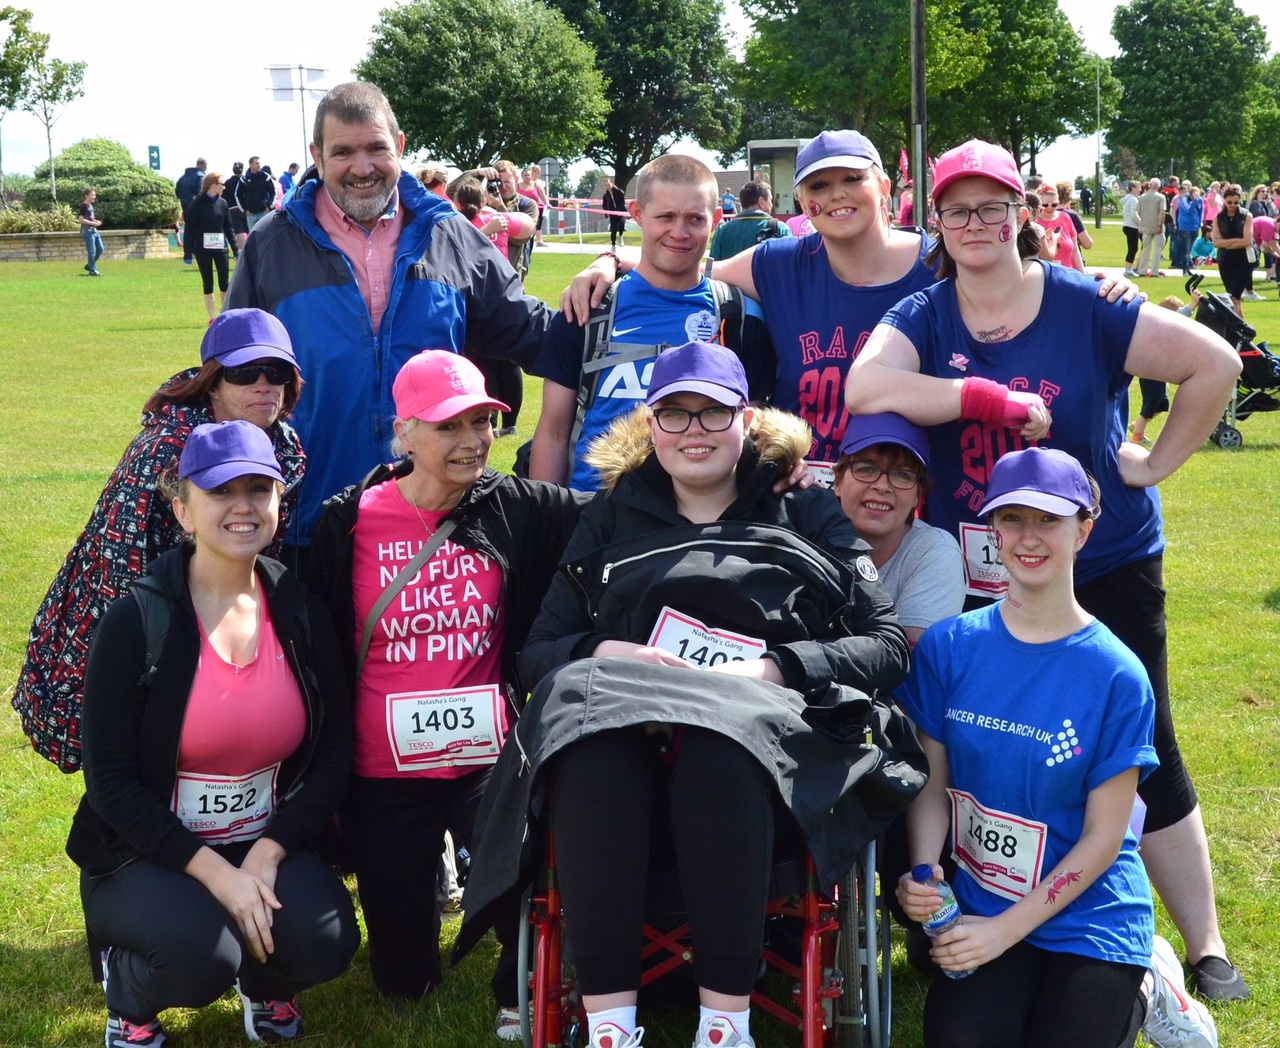 Last year, Natasha completed the race in a wheelchair. This year, she's walking it. 